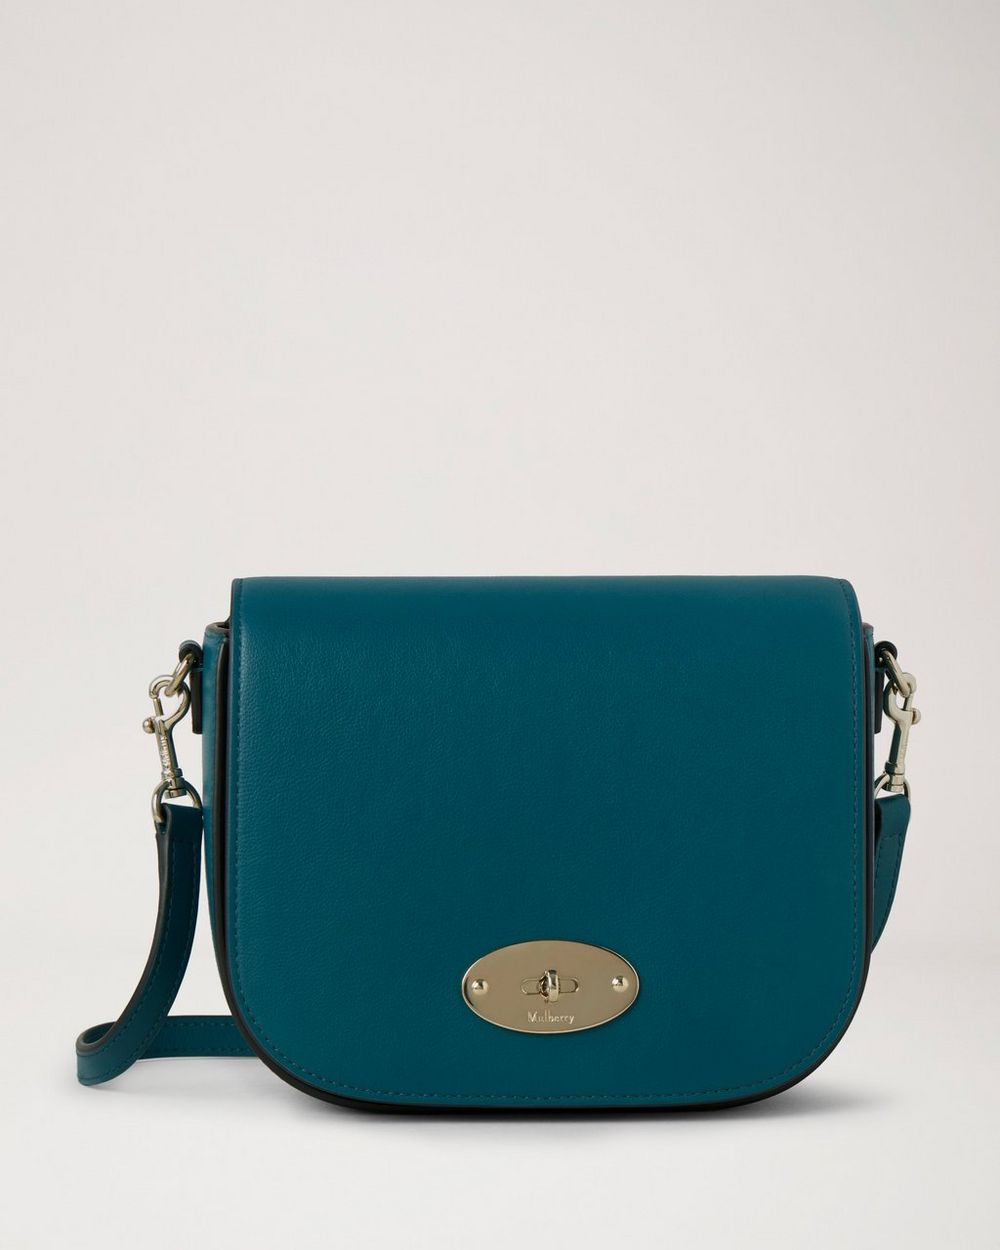 Mulberry Small Darley Leather Crossbody Bag in Blue